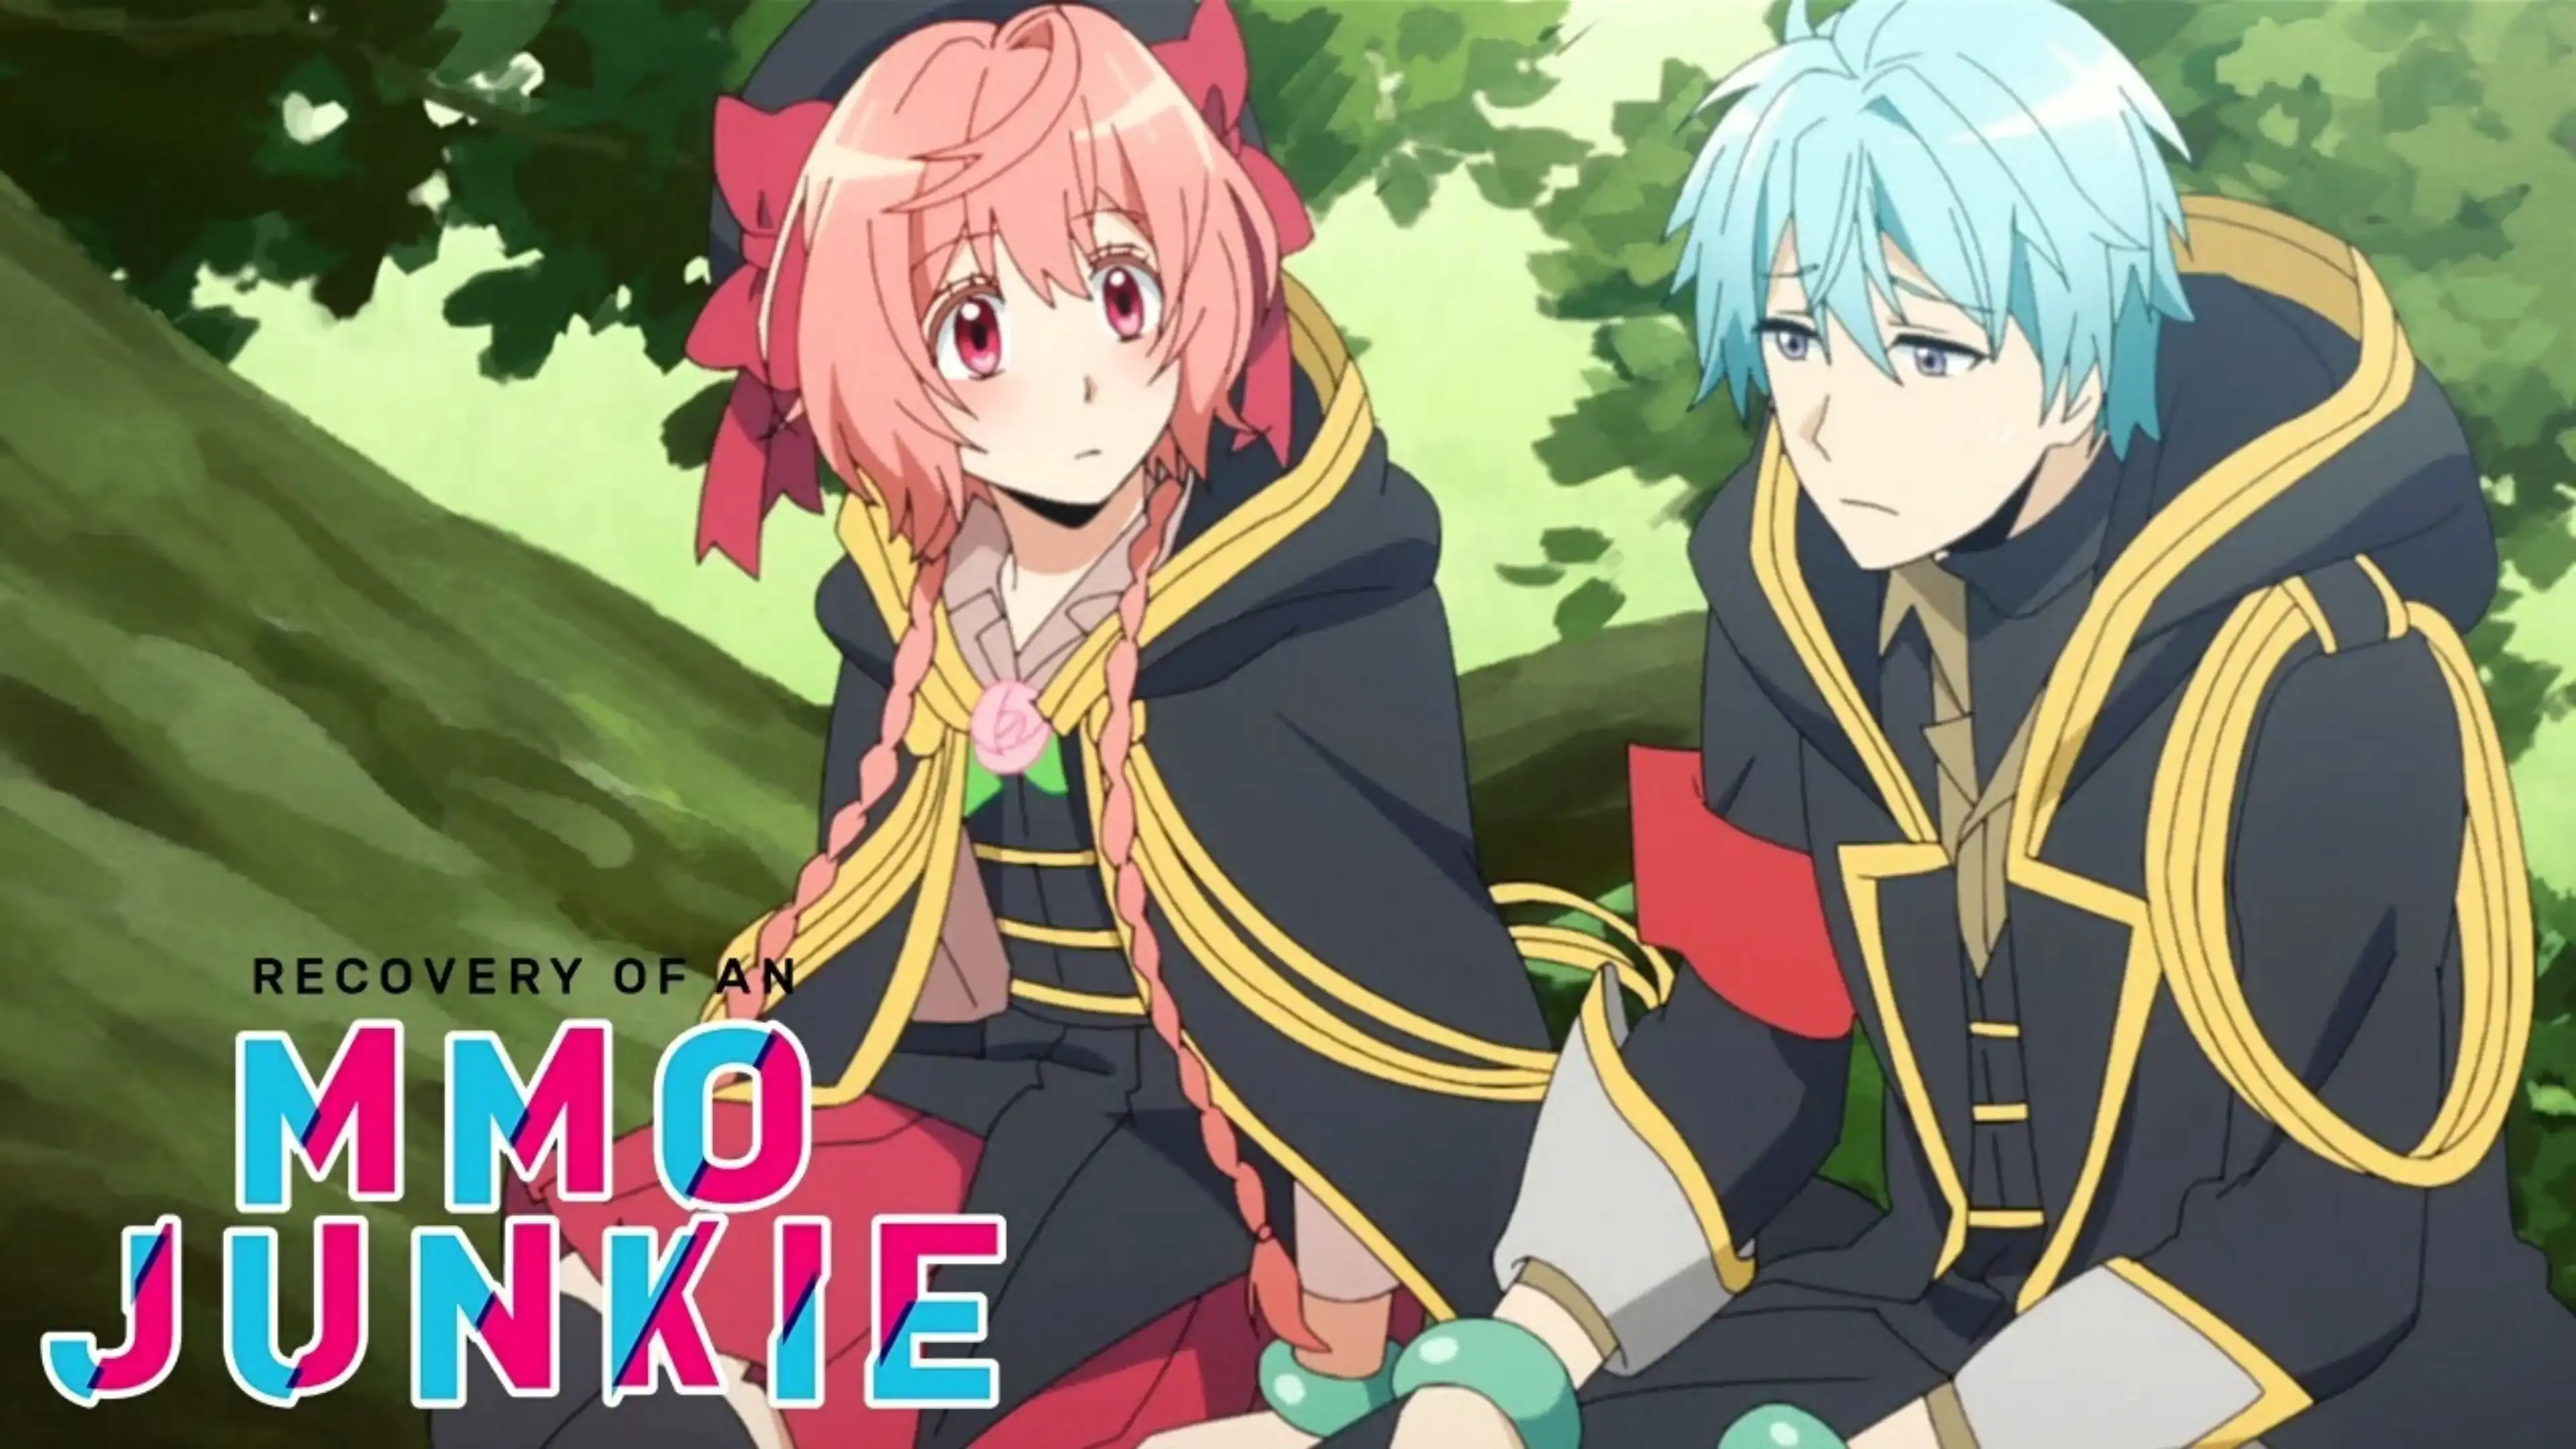 Recovery of an MMO Junkie (Season 1 + Special) 1080p Dual Audio